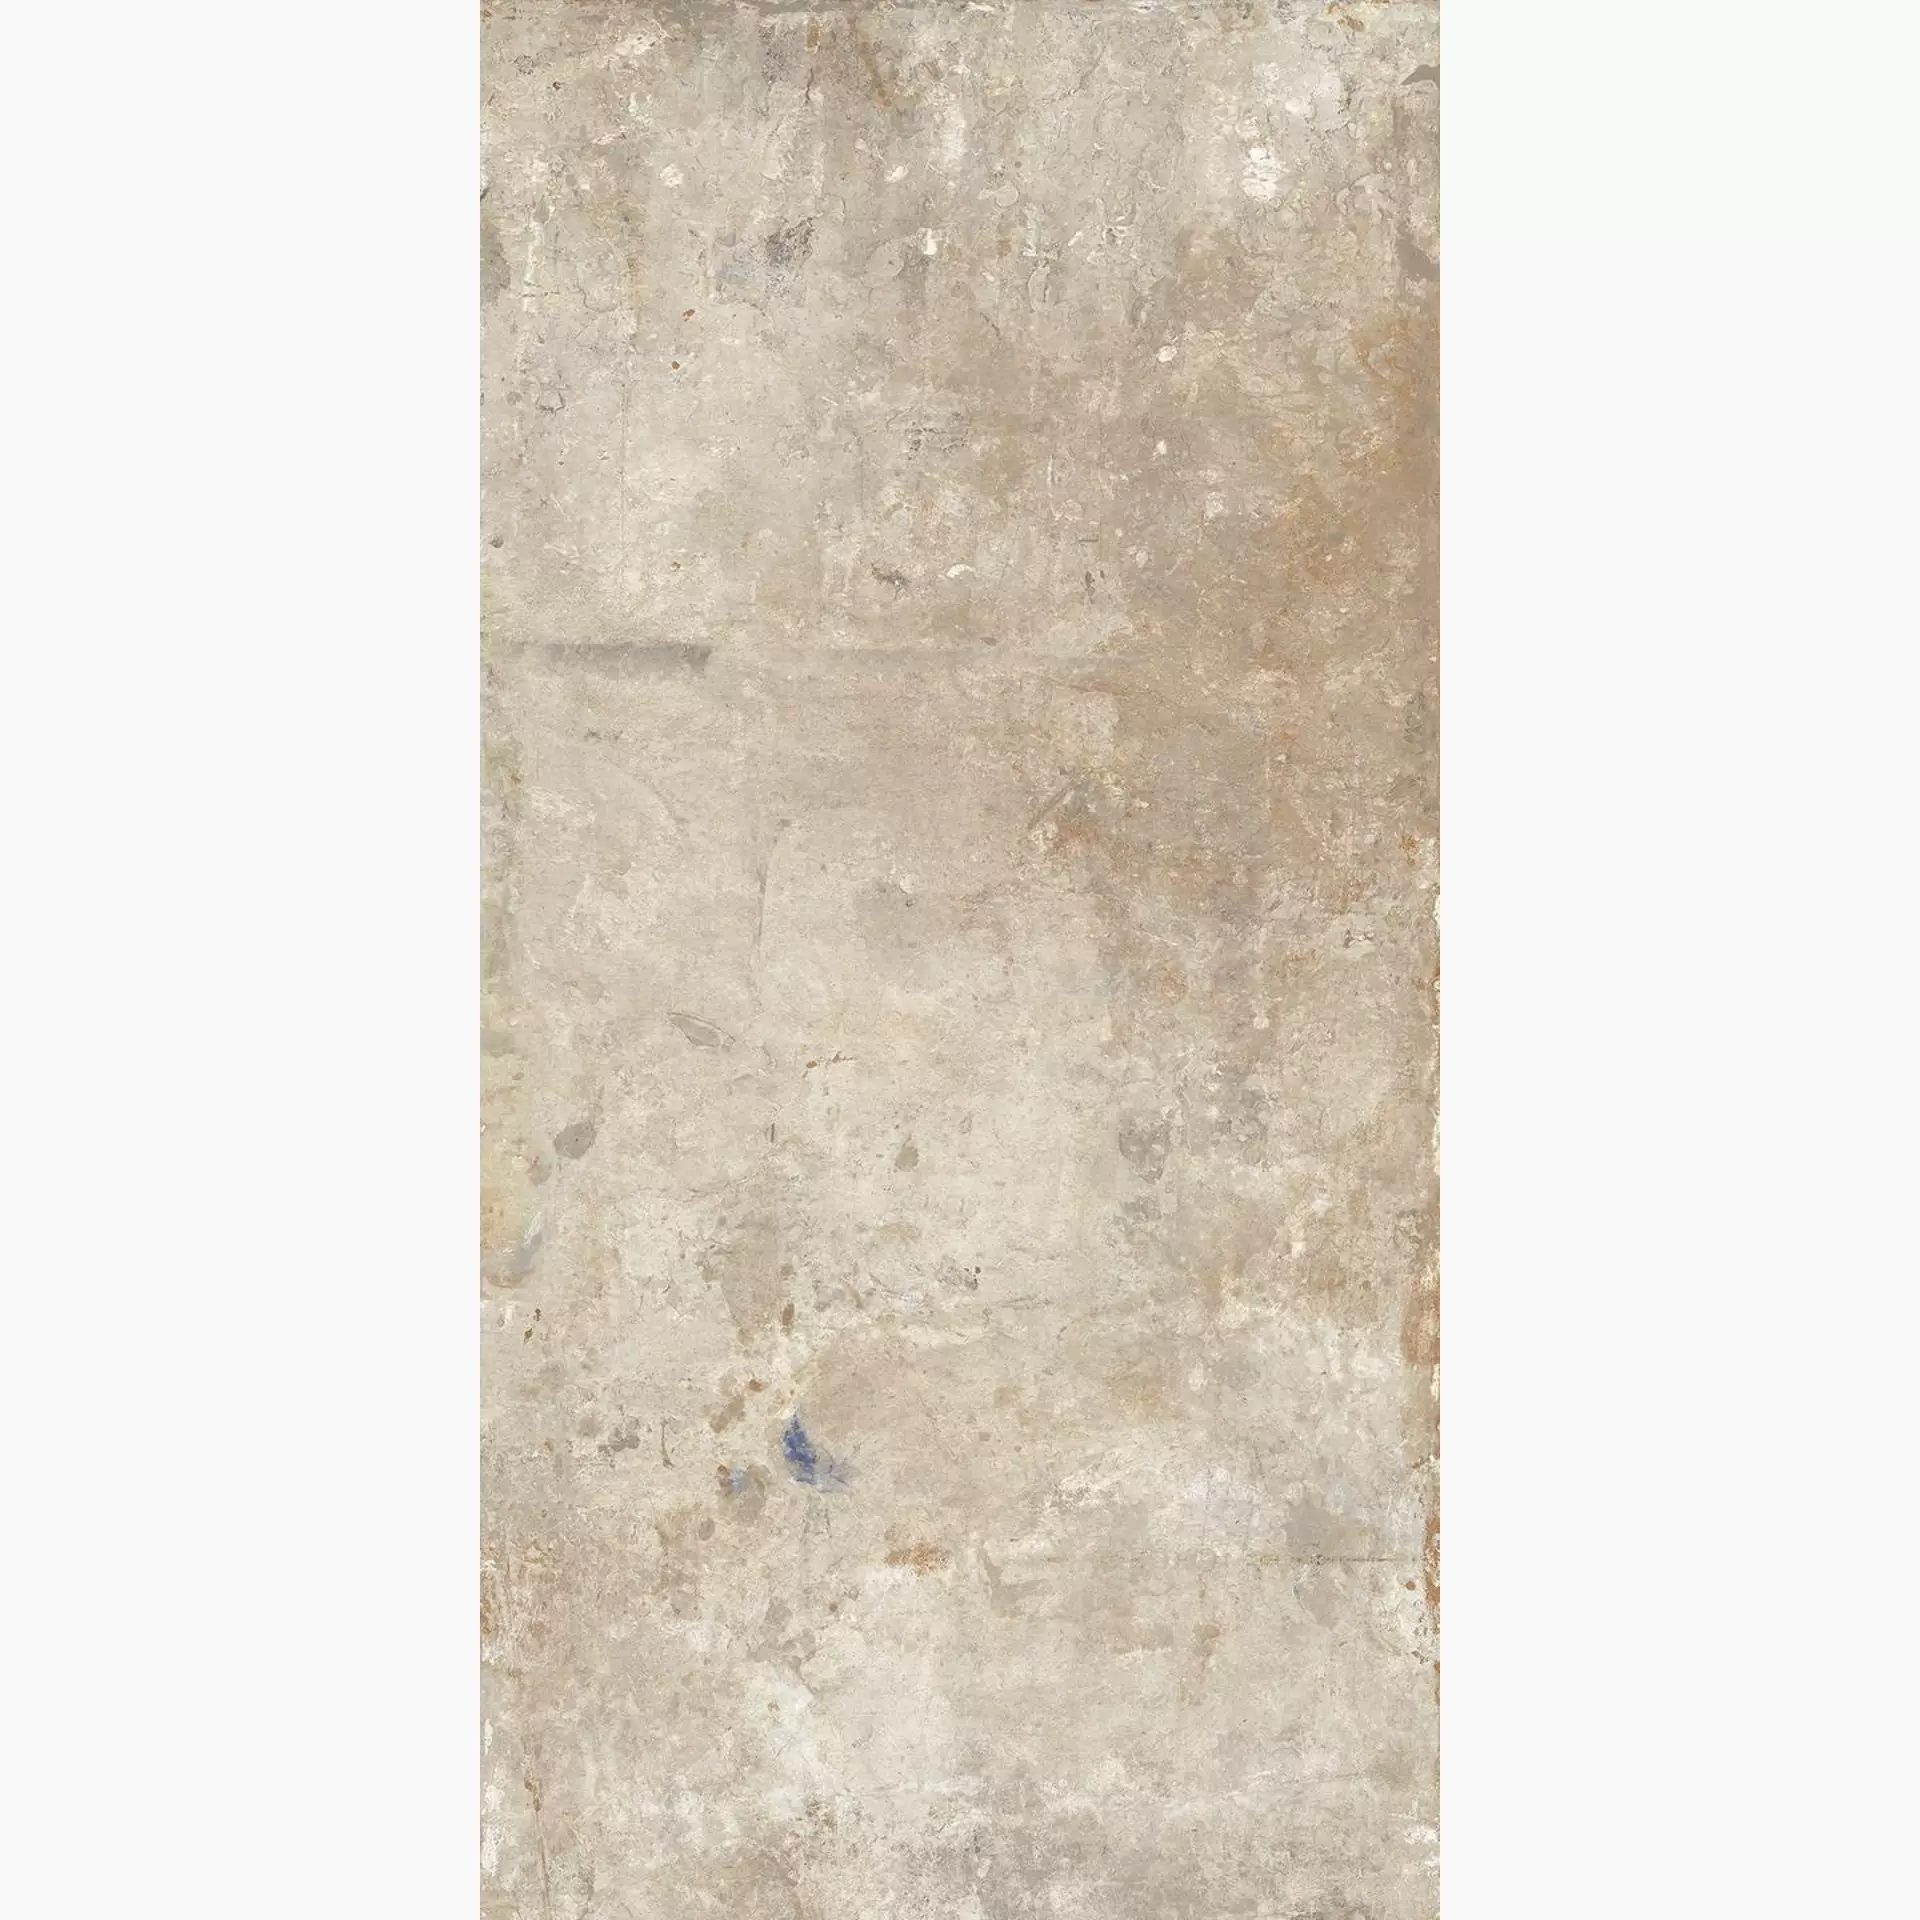 Fondovalle Action Dark Natural ACT062 60x120cm rectified 6,5mm